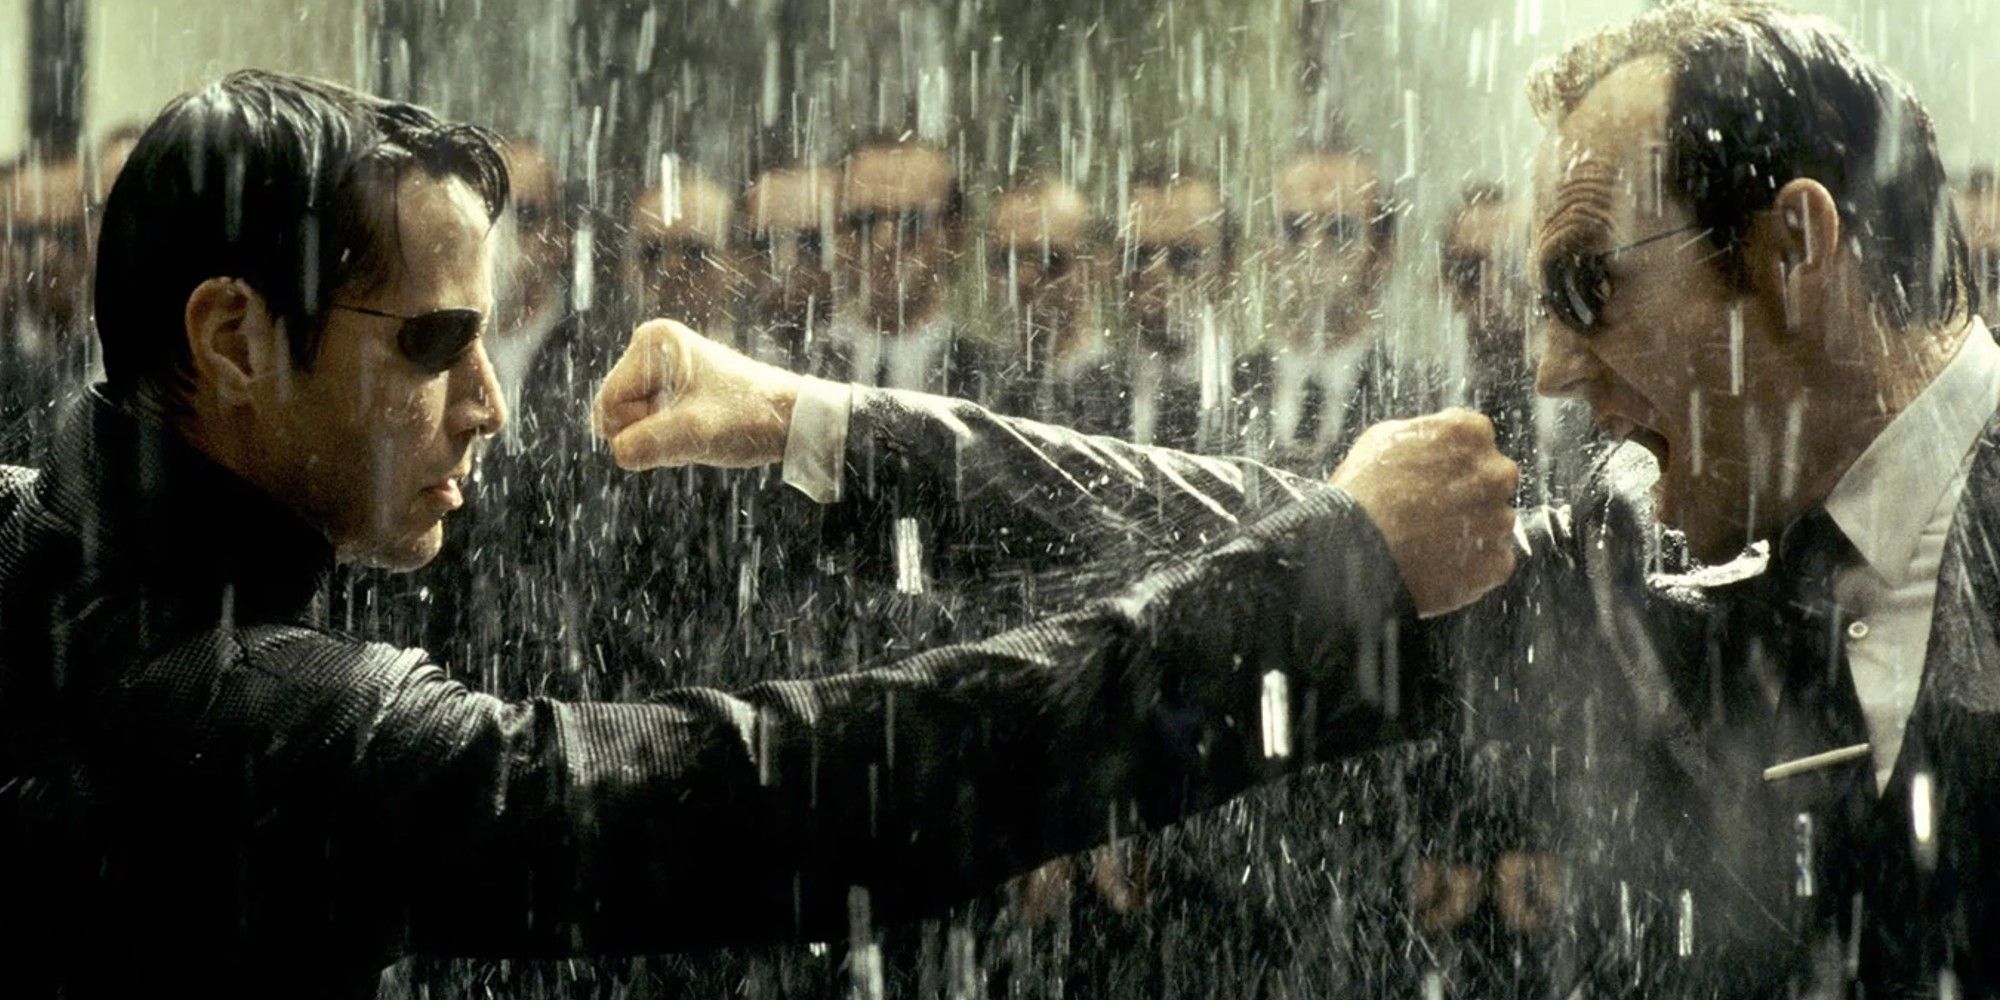 Keanu Reeves and Hugo Weaving in The Matrix Revolutions (2003)